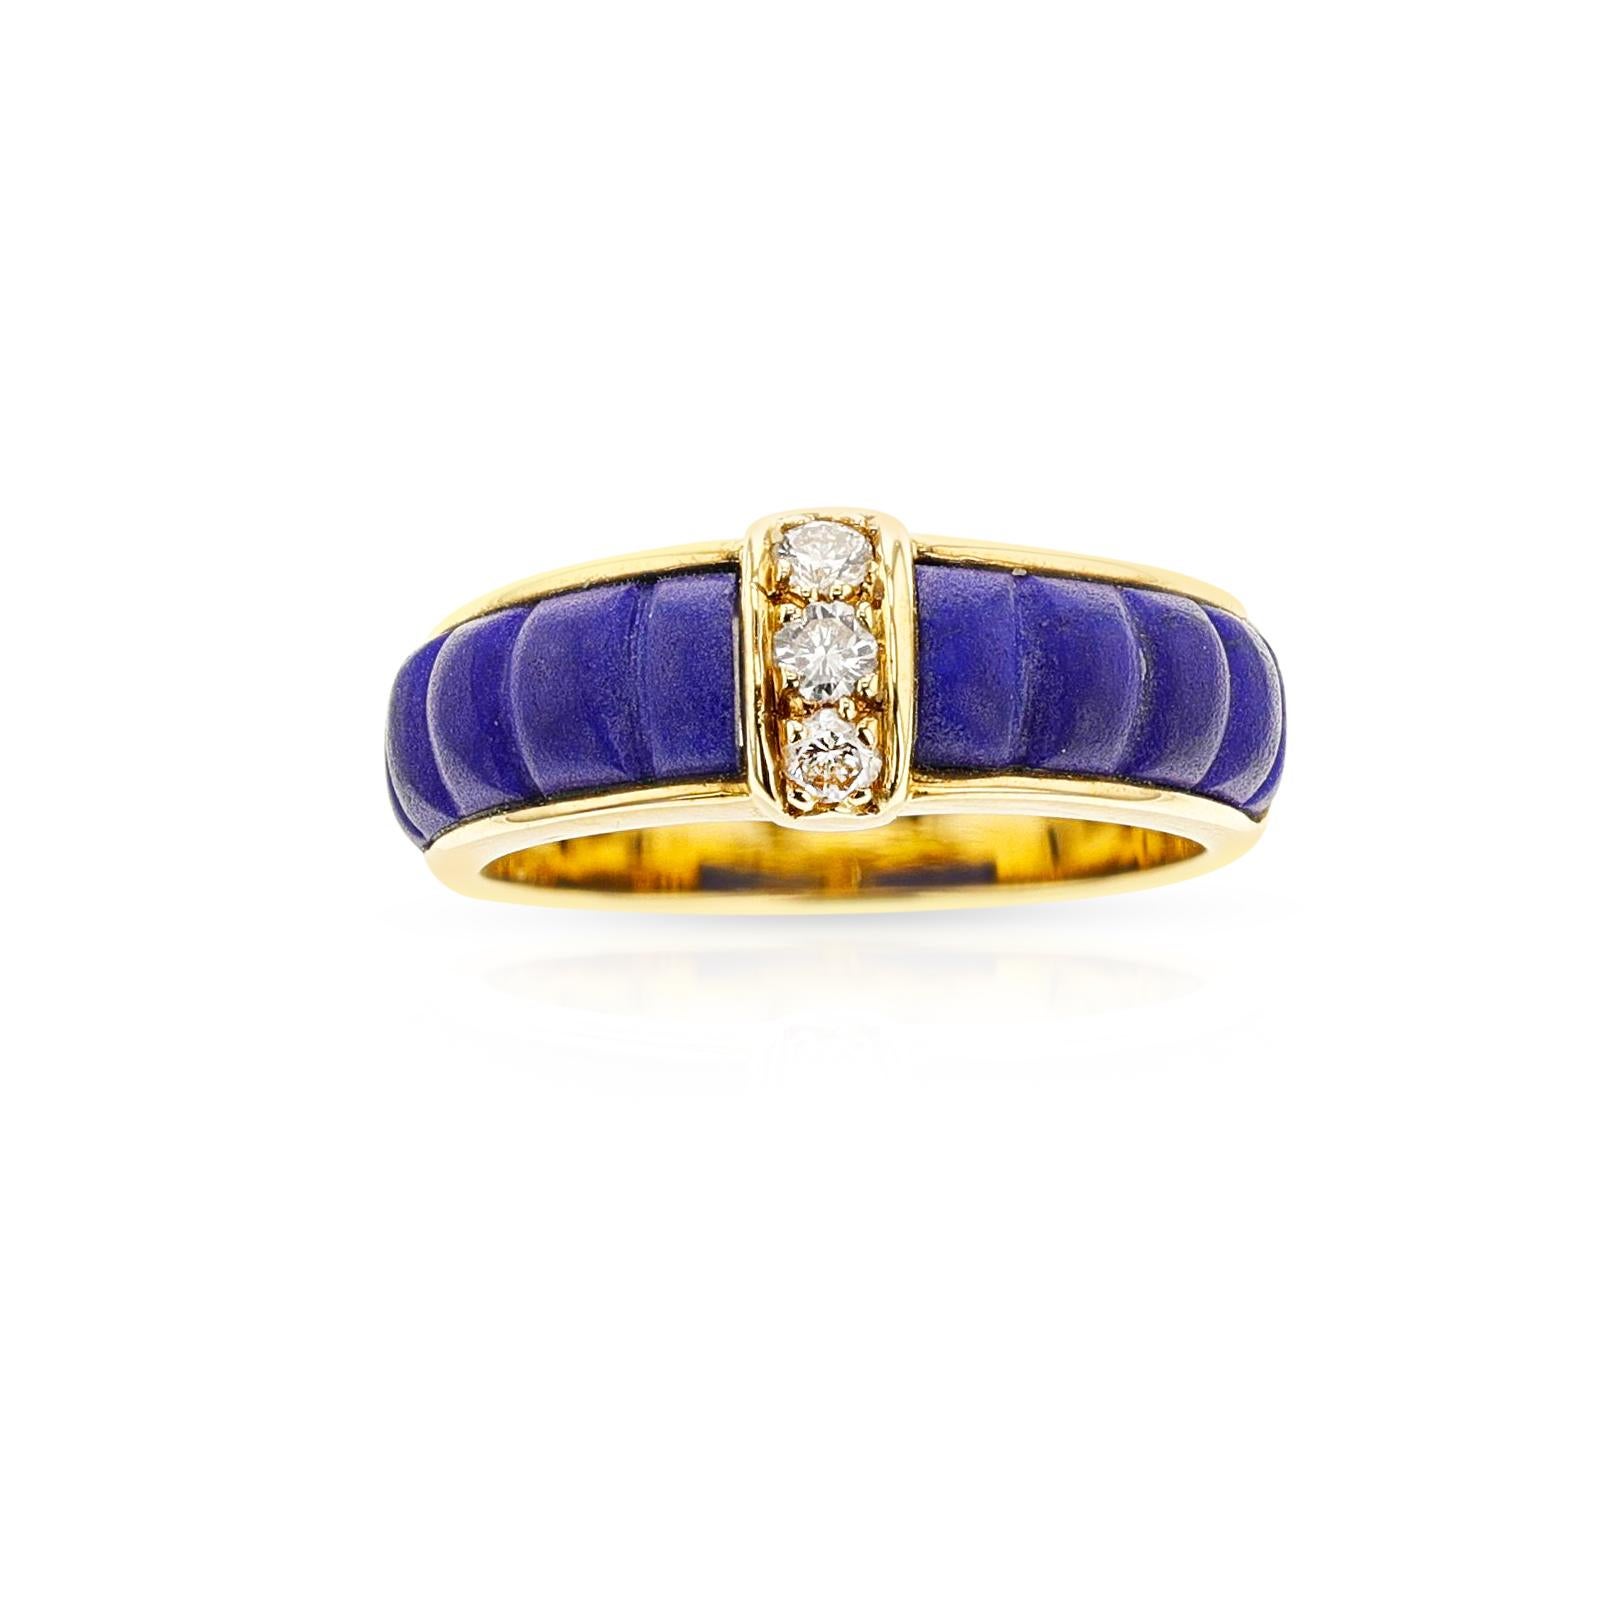 A French Van Cleef & Arpels Carved Lapis and Diamond Ring made in 18k yellow gold. The total weight of the ring is 4.37 grams. The Ring Size is 5.25 US.

SKU: 1321-ABHJMPL
